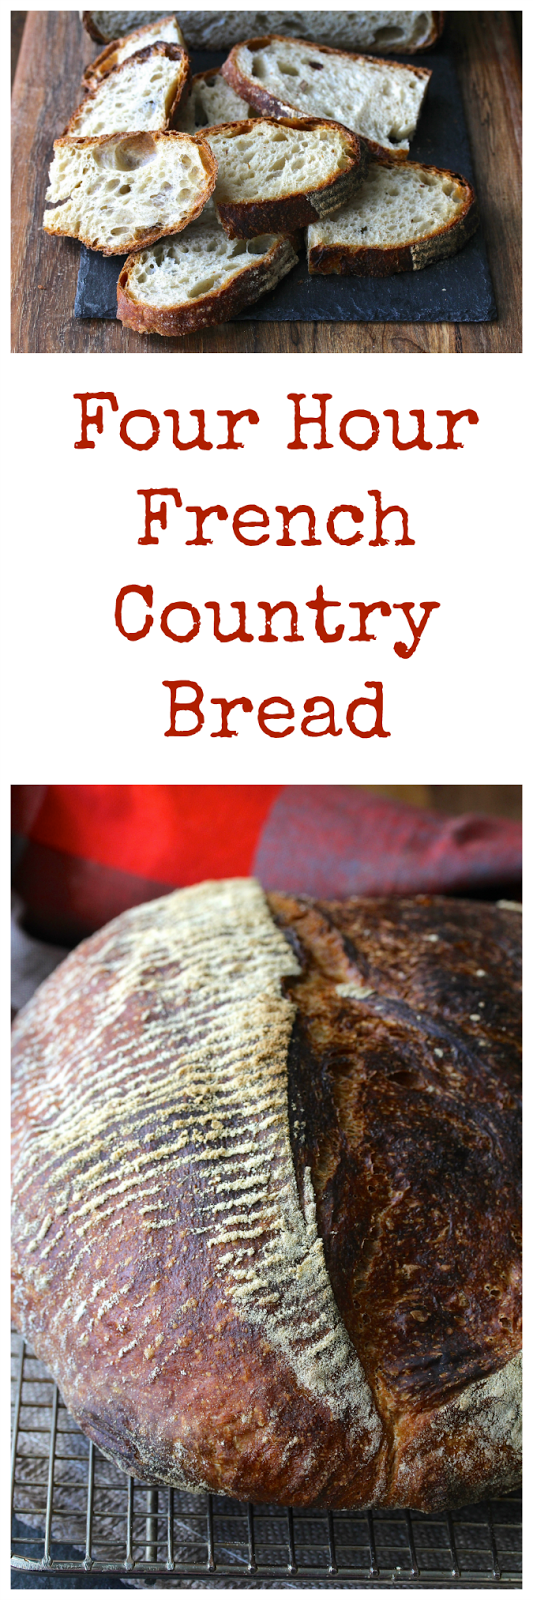 This Four Hour French Country Bread recipe will produce an artisan loaf with a crispy crust and a soft, moist, and, depending on how much water you add to the dough, an airy crumb.